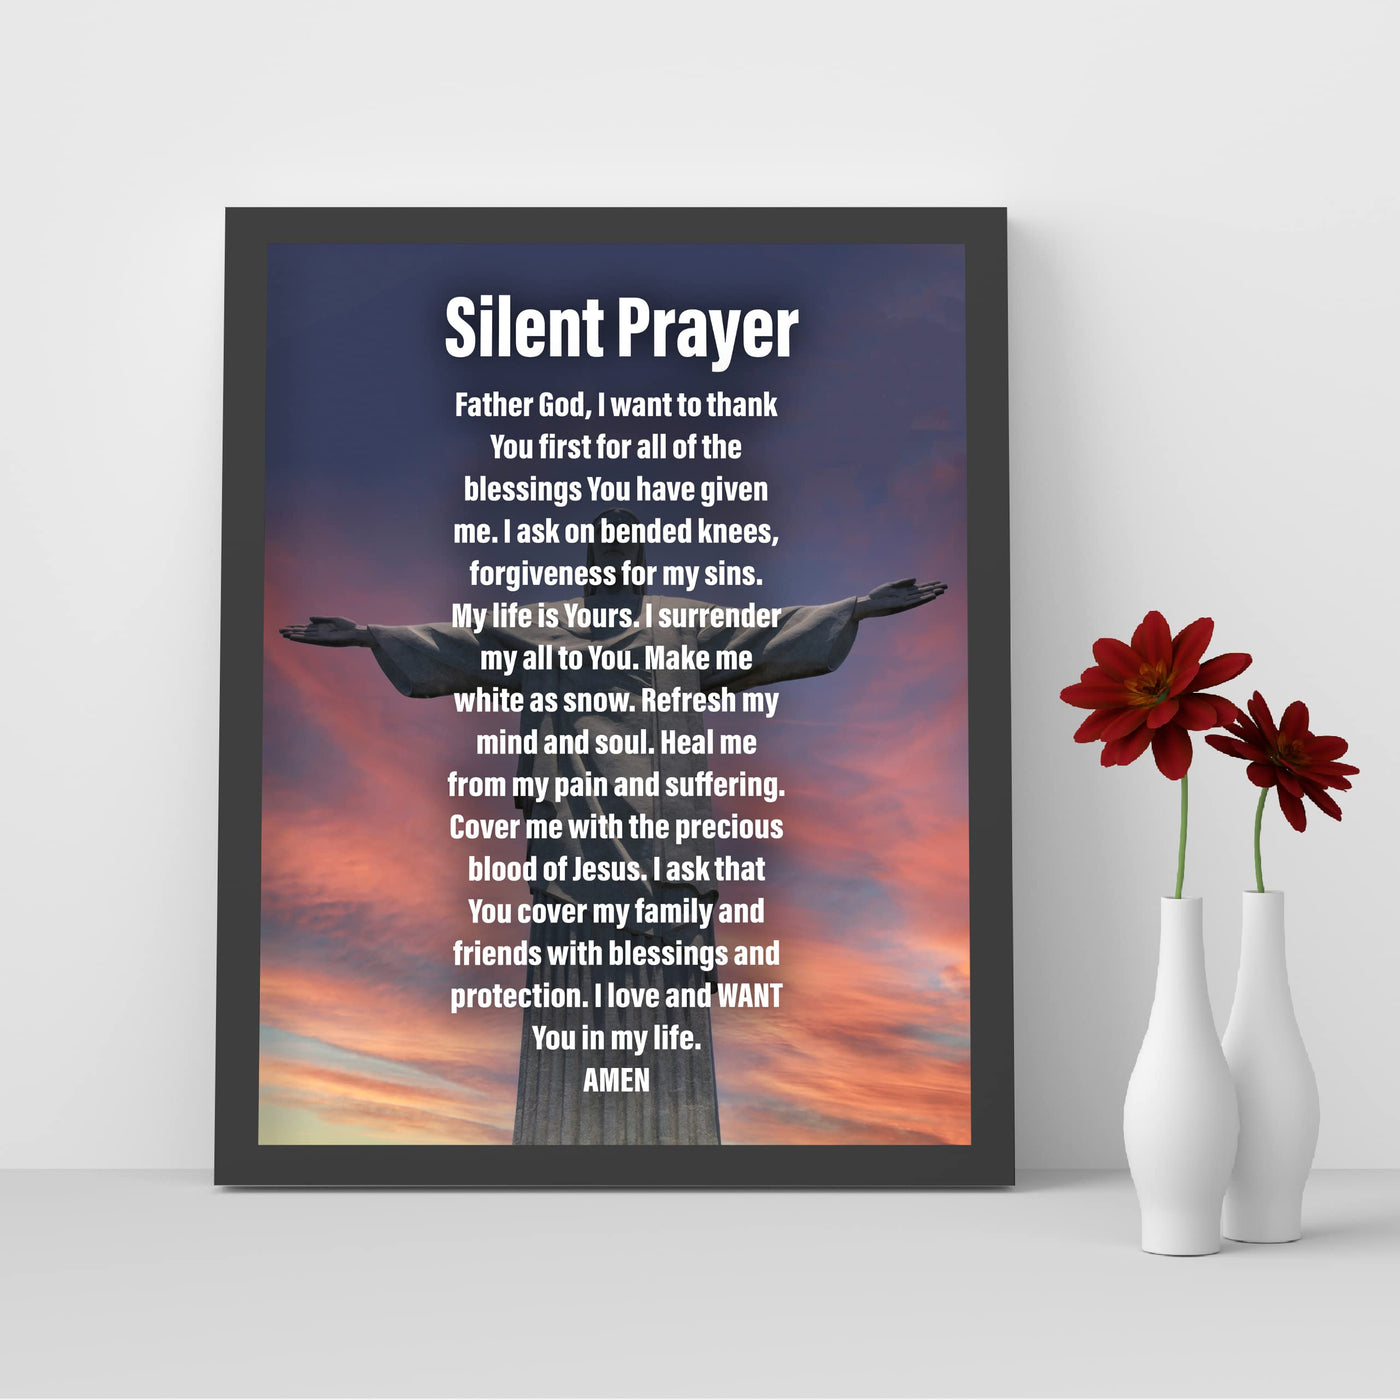 Silent Prayer- Inspirational Christian Wall Art -8 x 10" Motivational Christ the Redeemer Statue Picture Print -Ready to Frame. Home- Church- Office Decor & Religious Gifts. Great Prayer of Faith!